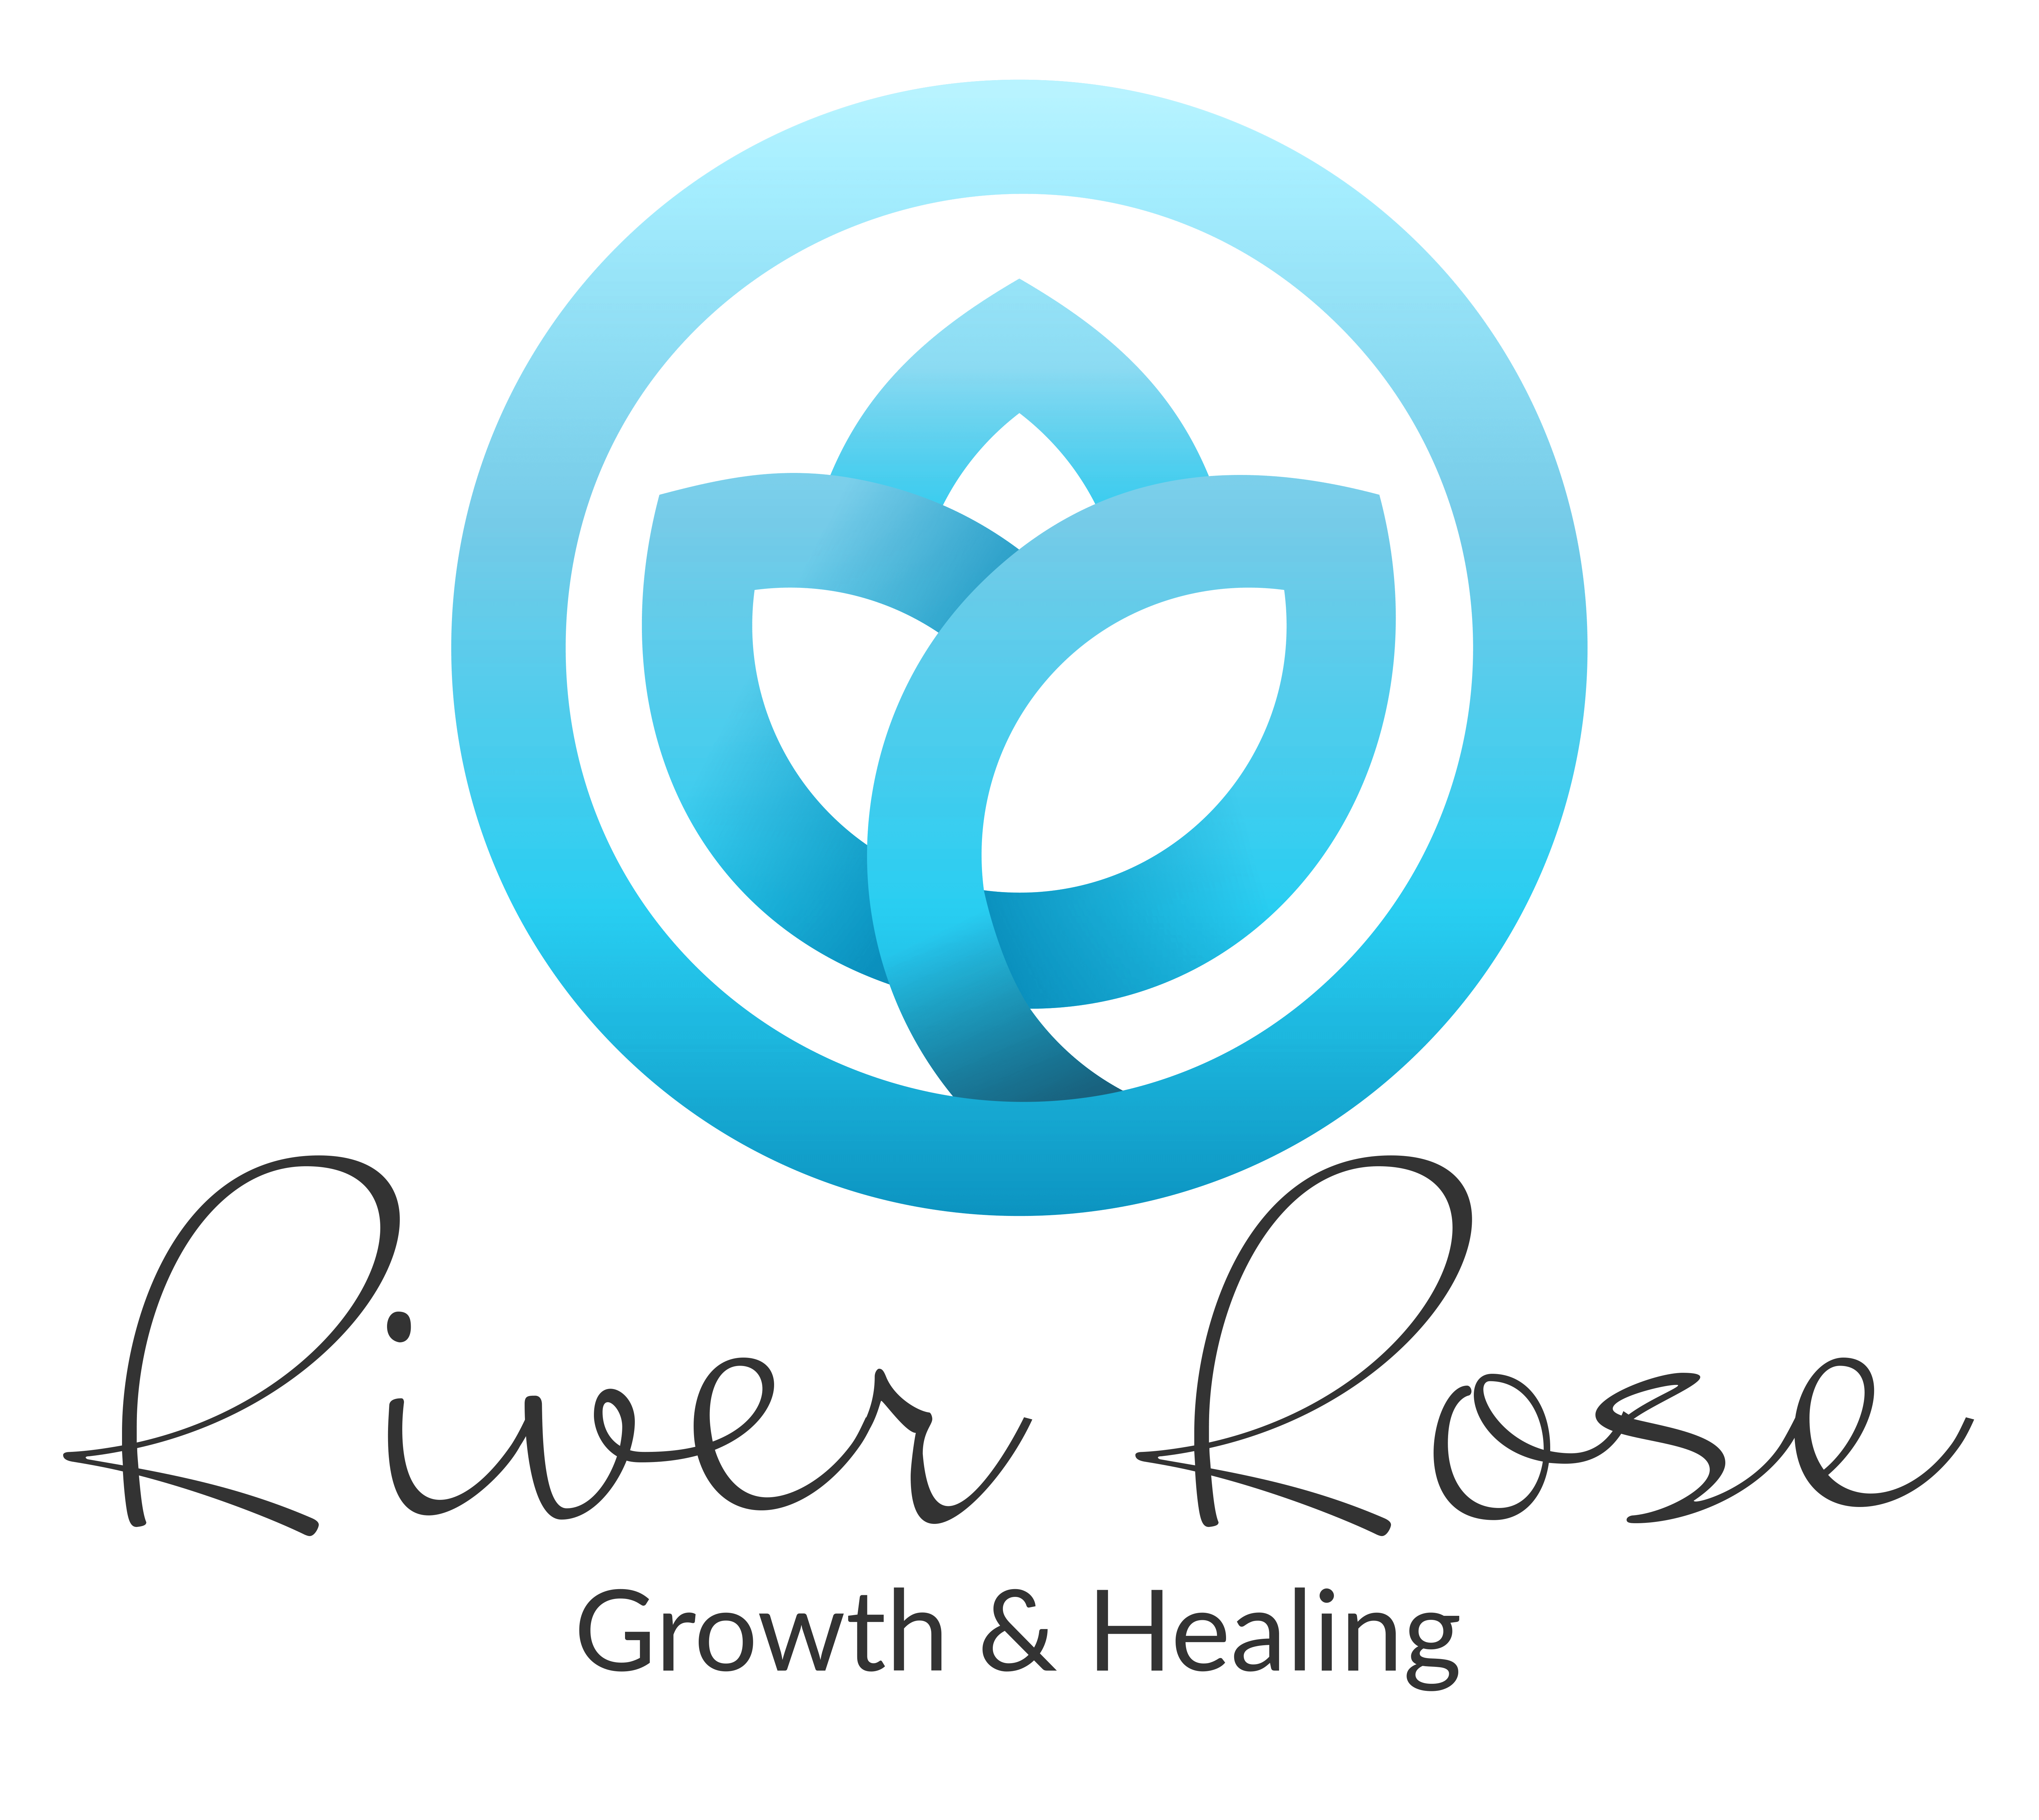 River Rose Growth & Healing – Collateral